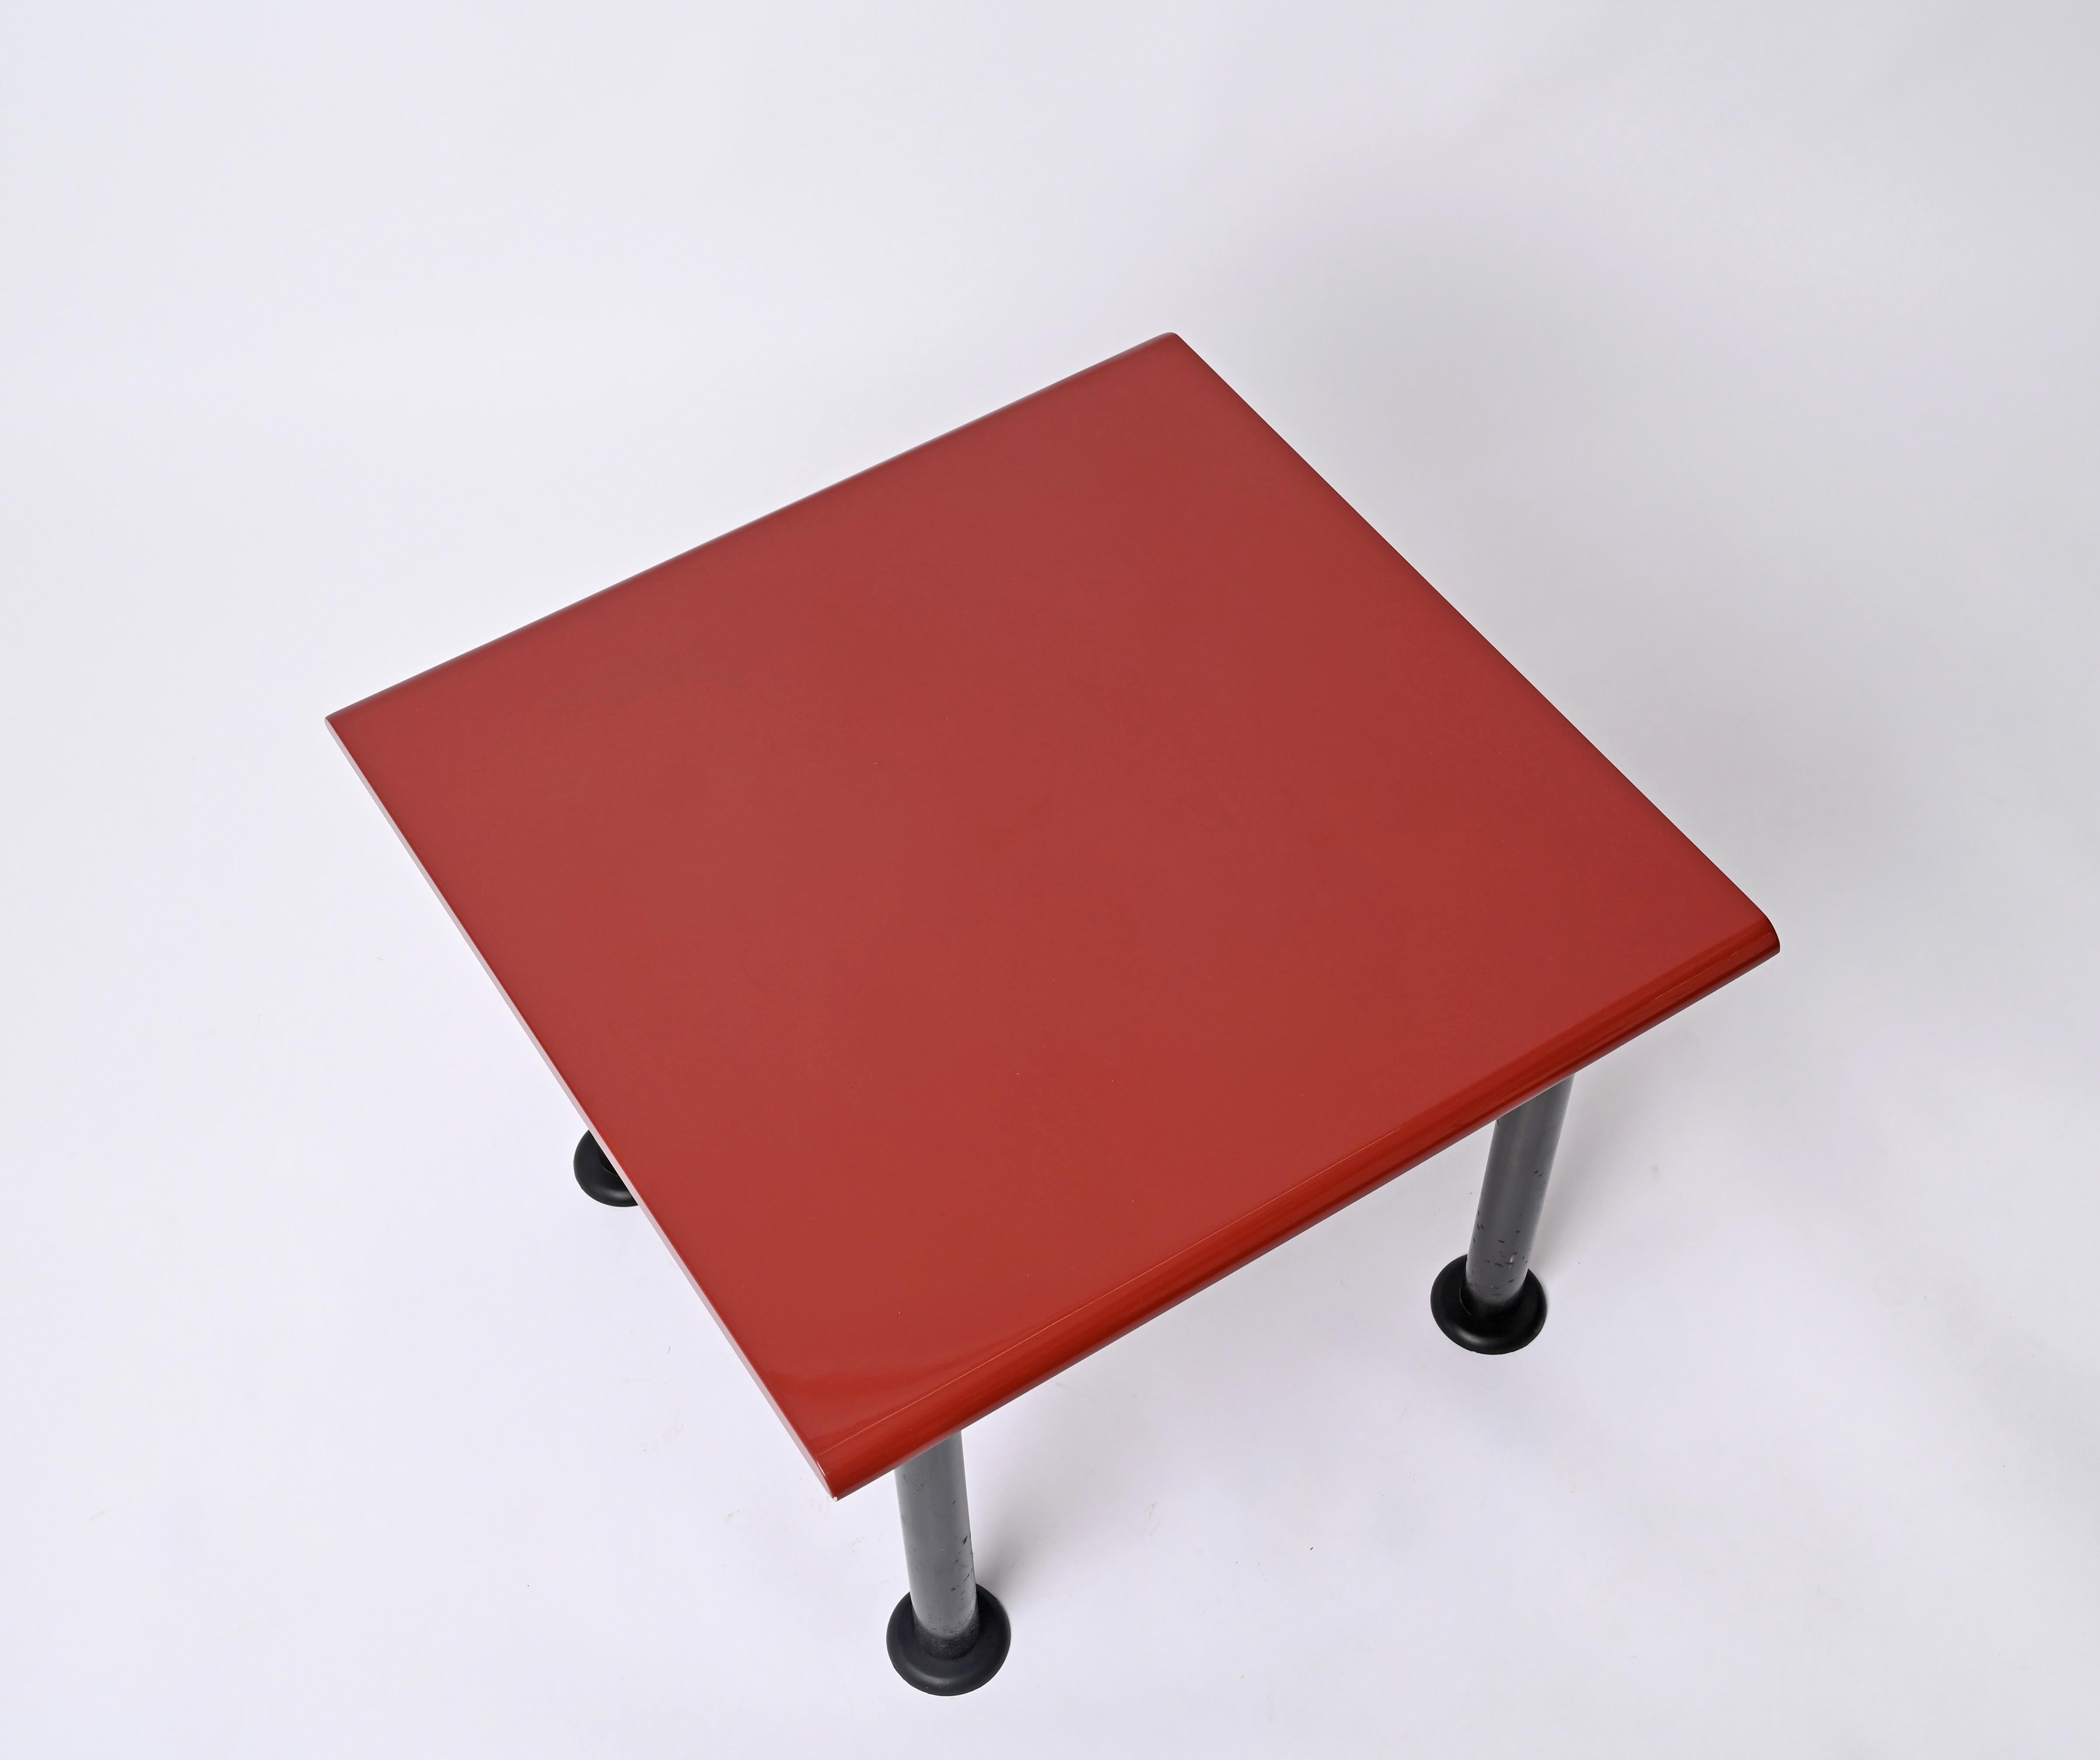 Midcentury Memphis Style Square Coffee Table with Cardinal Red Top, Italy 1980s For Sale 7